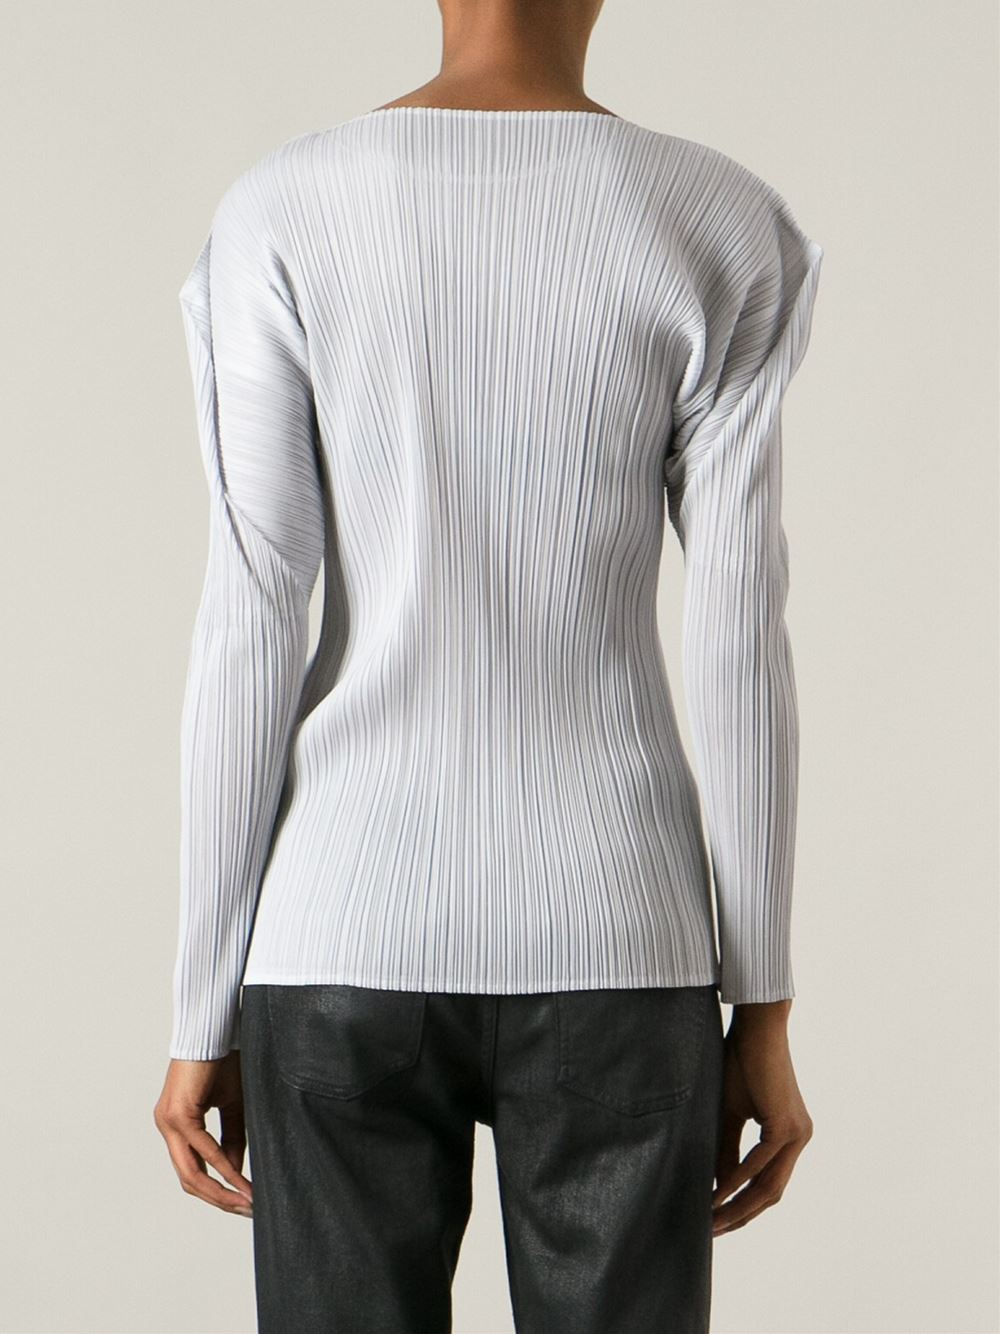 Lyst - Pleats Please Issey Miyake Pleated Top in Gray